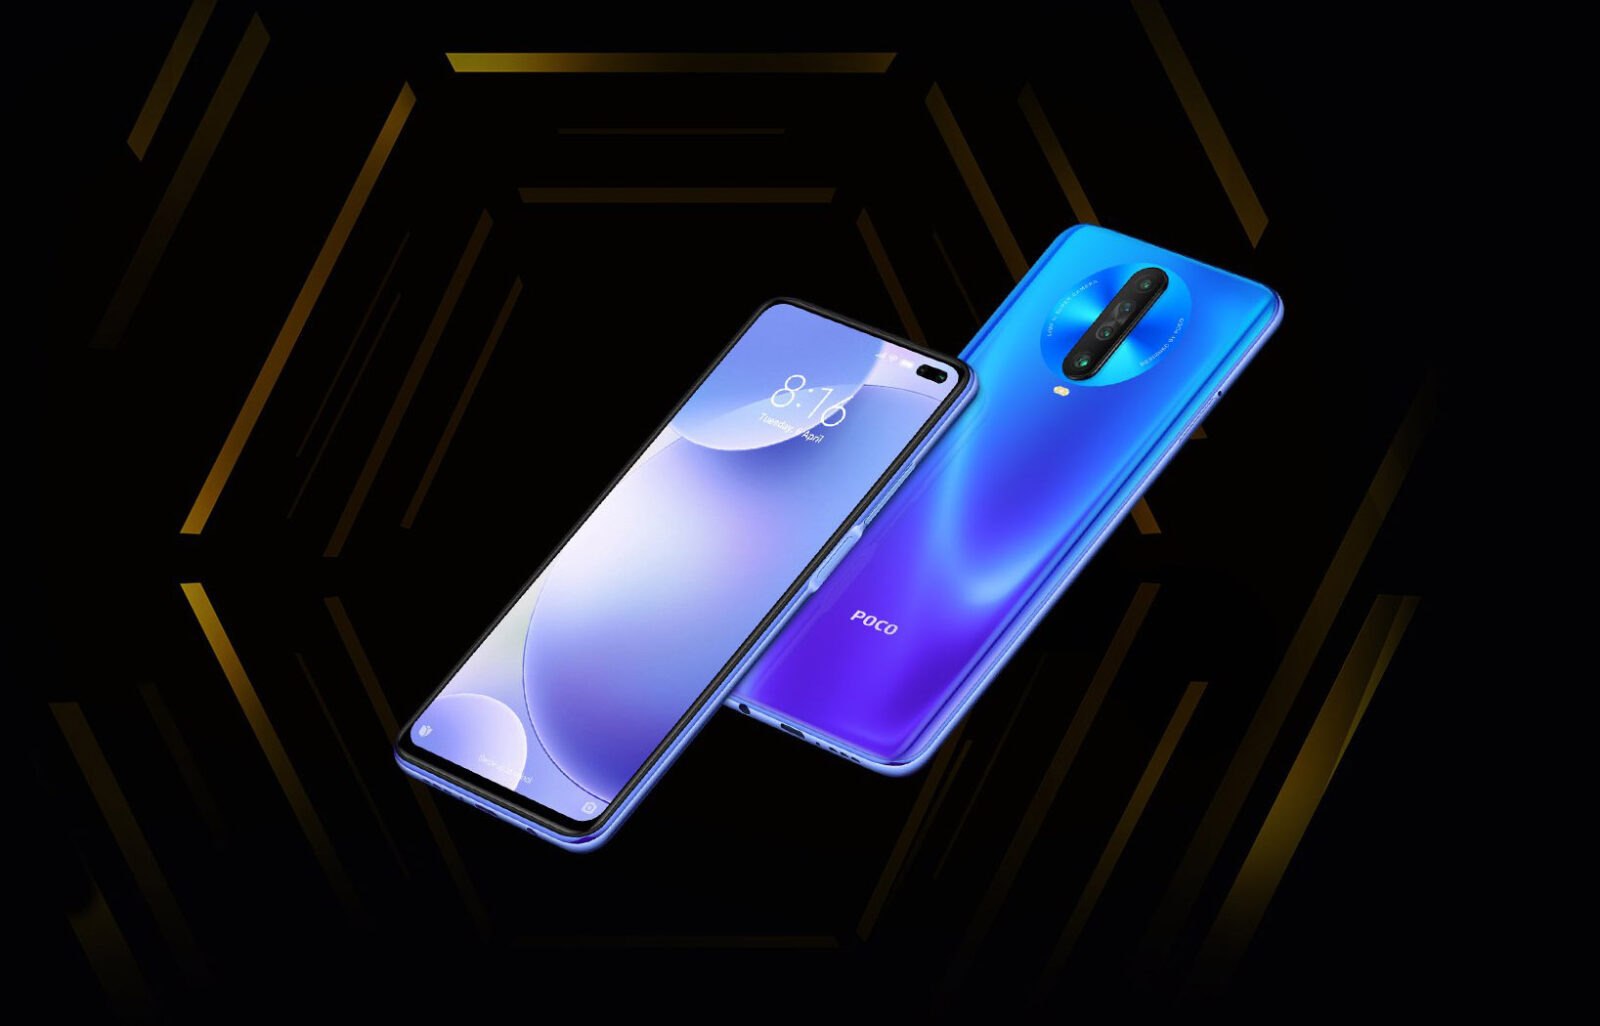 poco x2 launched in india